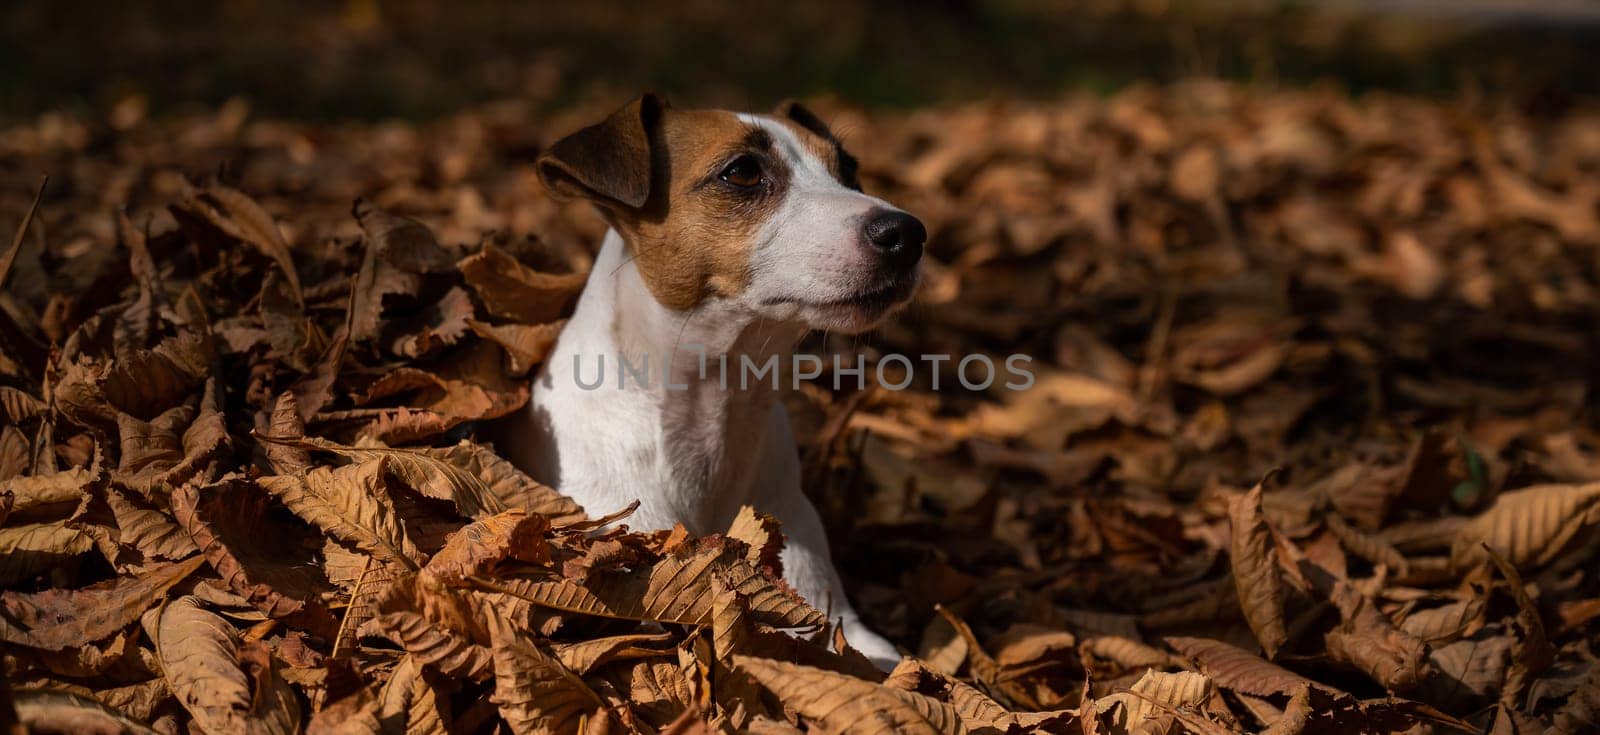 Jack Russell Terrier dog in a pile of yellow fallen leaves. by mrwed54